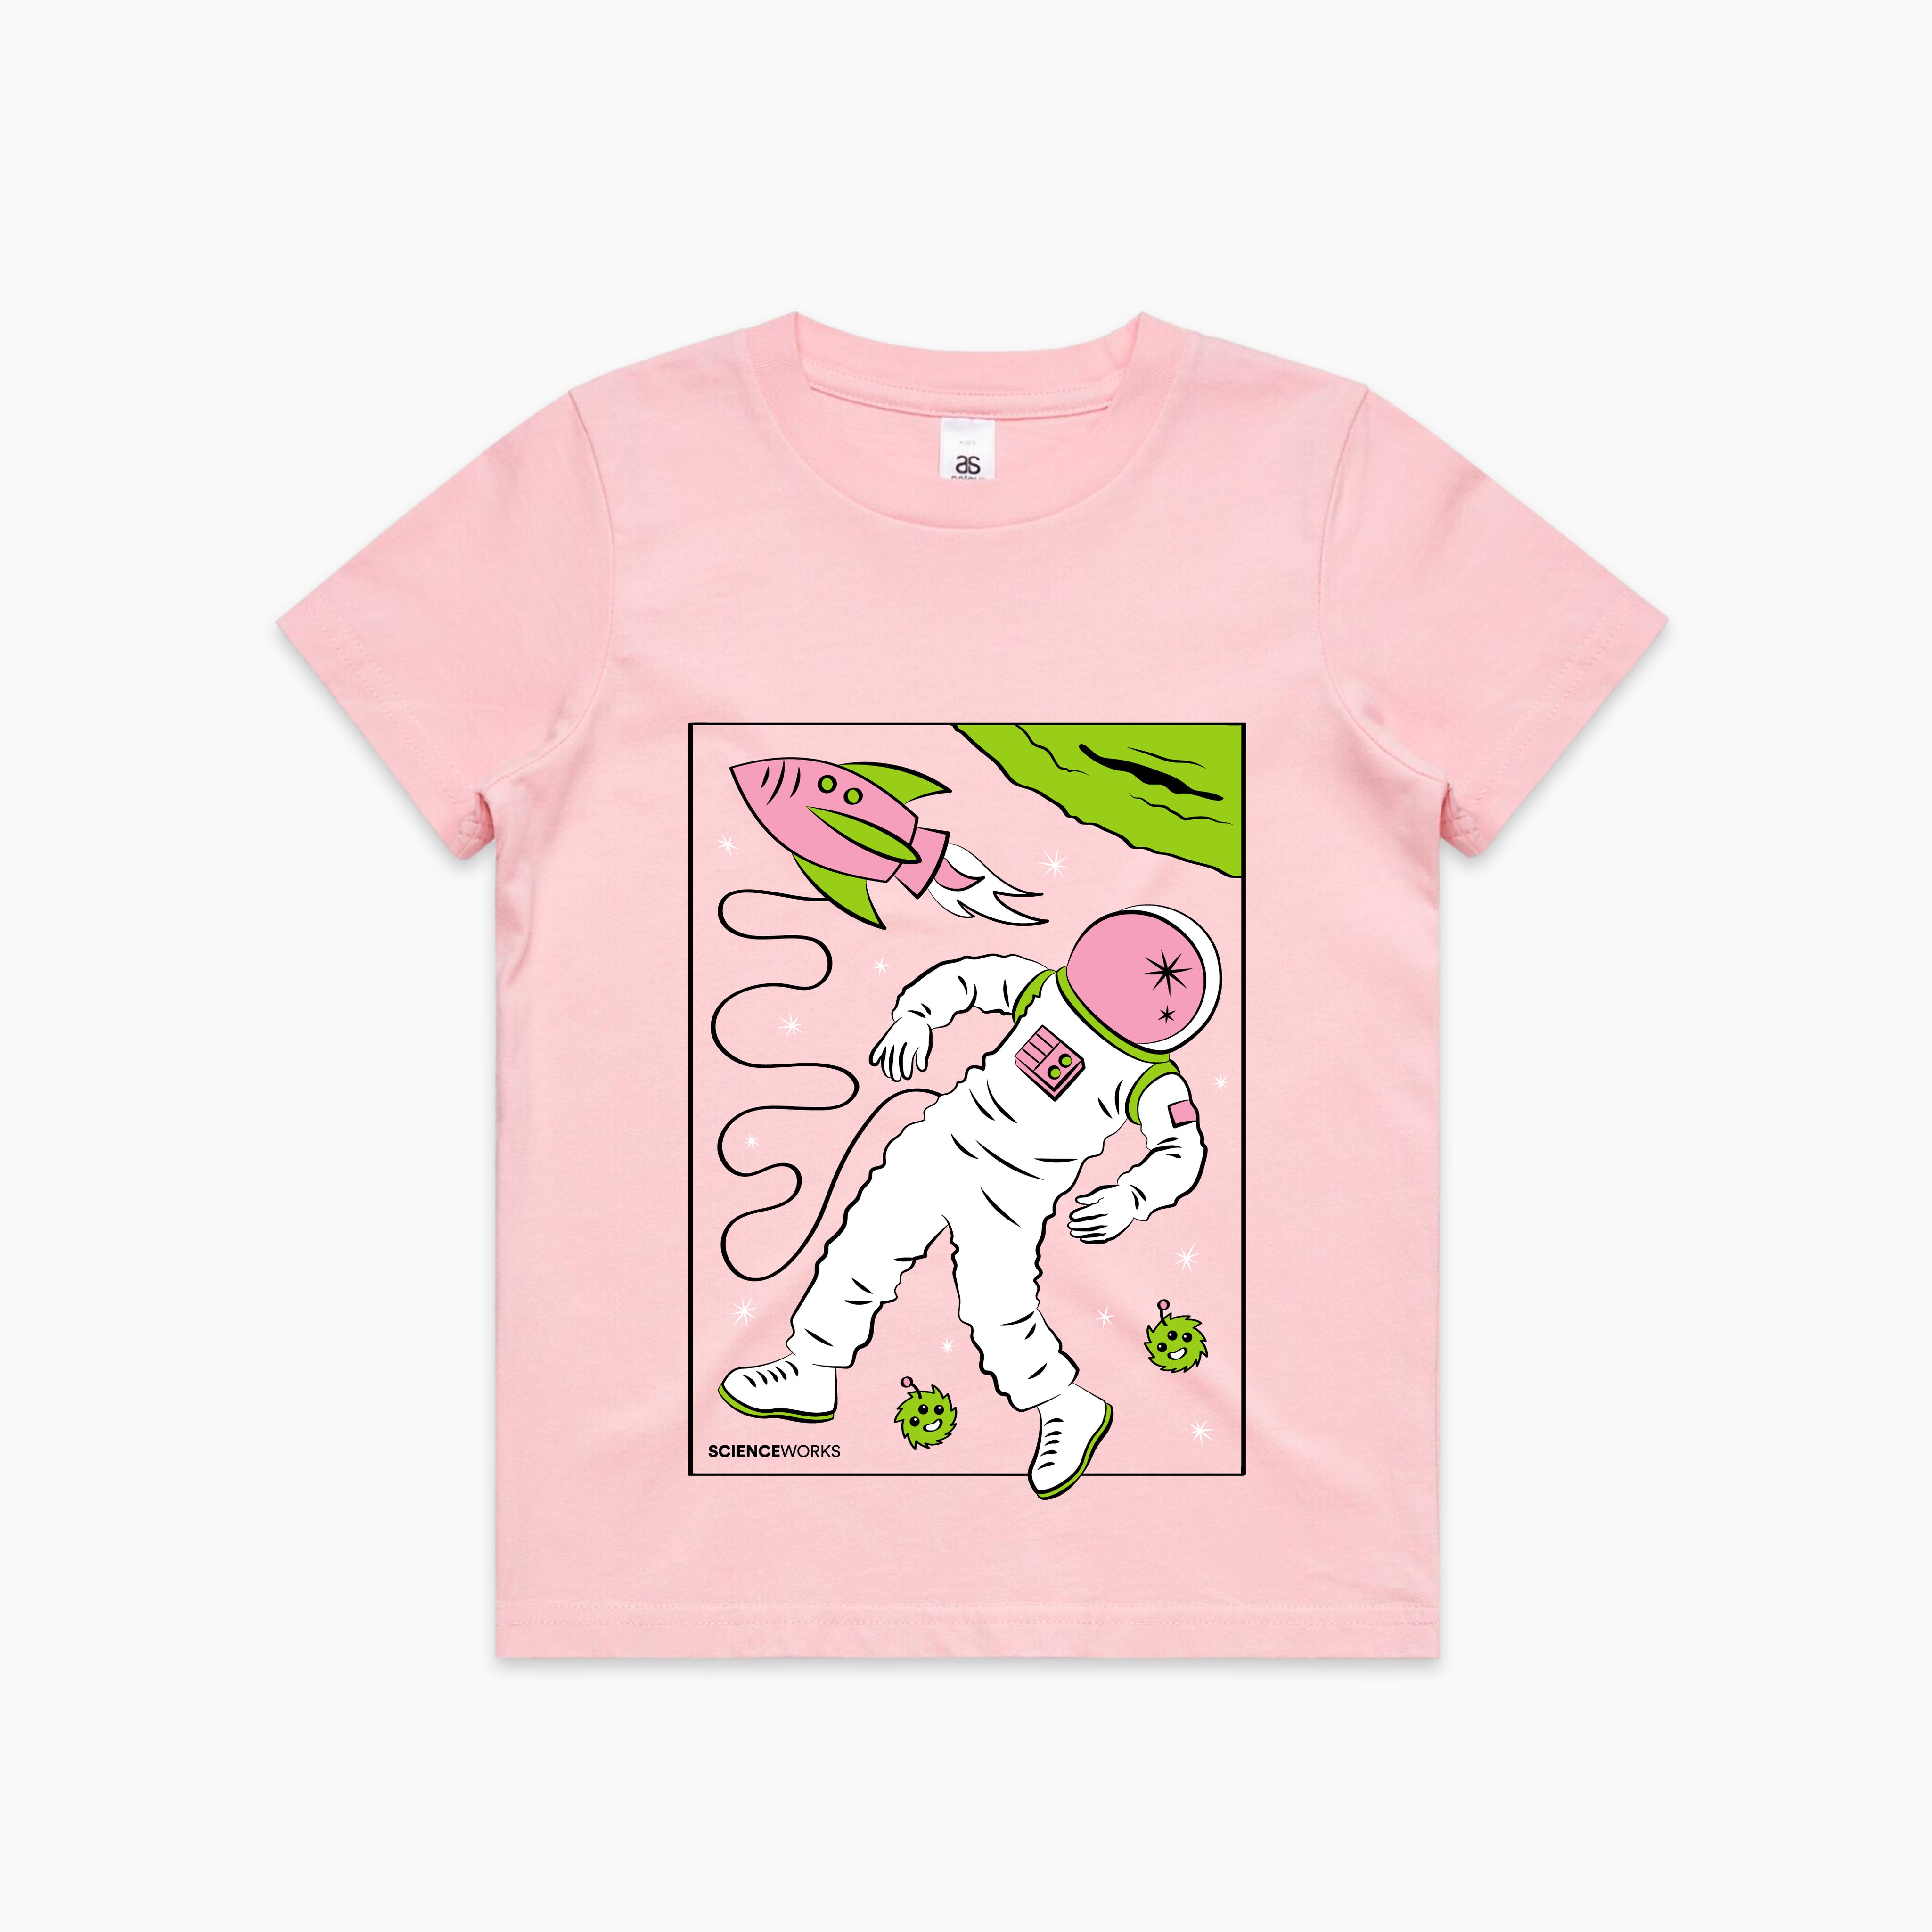 A baby pink kids tshirt with an image on the centre front. An astronaut is tethered to a green and pink rocket, floating next to a green planet. Two small three-eyed fluffy creatures are floating around the astronaut's feet. Scienceworks is written in small font at the bottom left of the image.